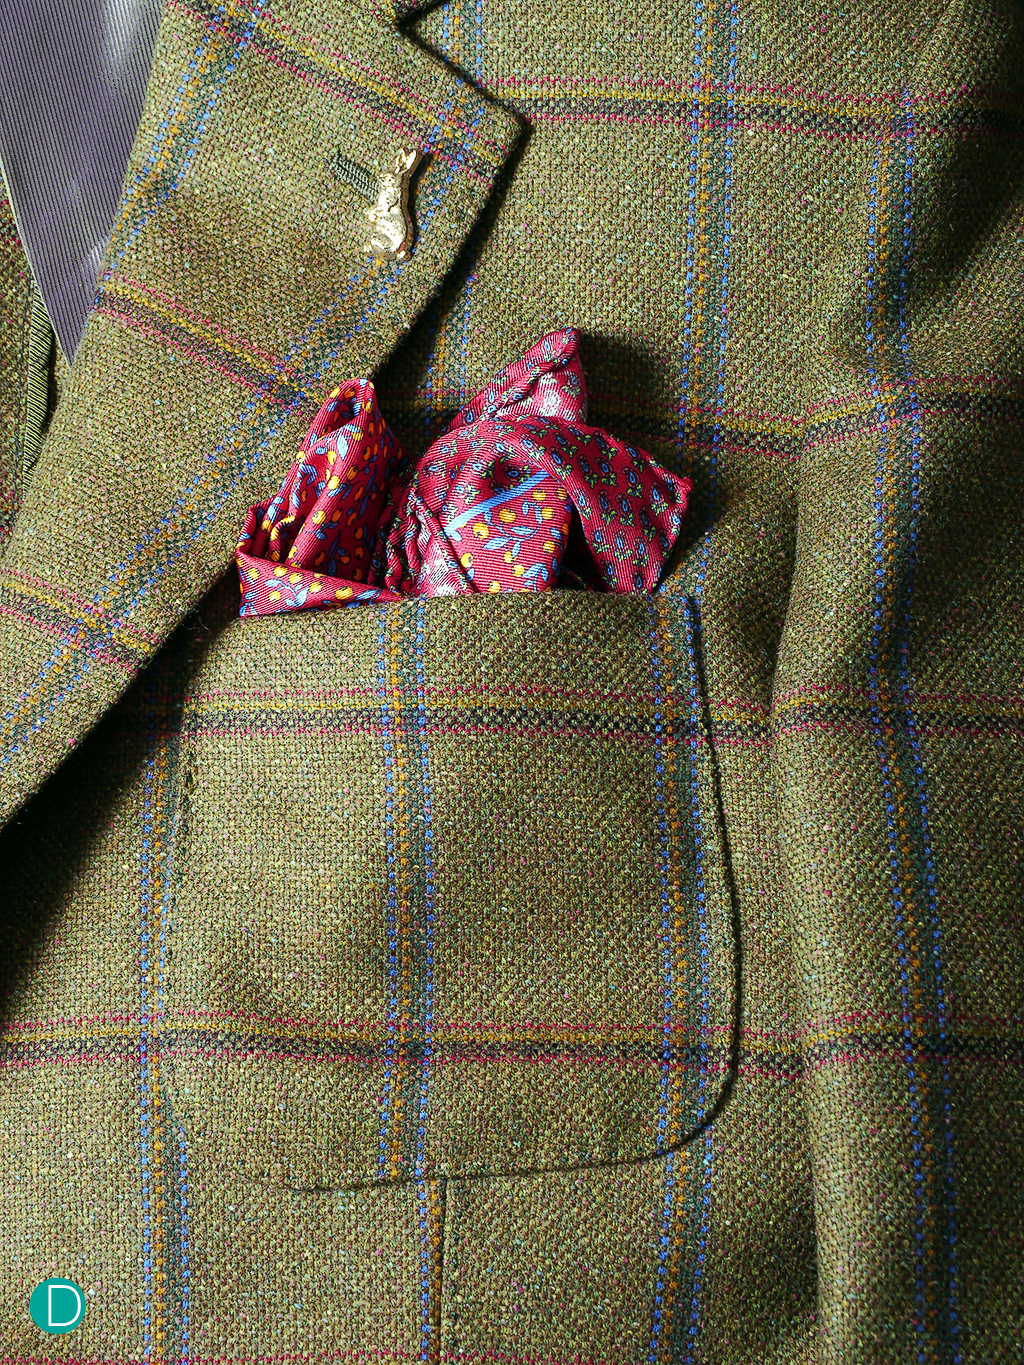 The revers are but in a slight curve, accentuating the line. Note the patch breast pocket which is slightly curved at the mouth and larger at the bottom. This gives the pocket an internal volume and enables it to take a pocket square nicely.